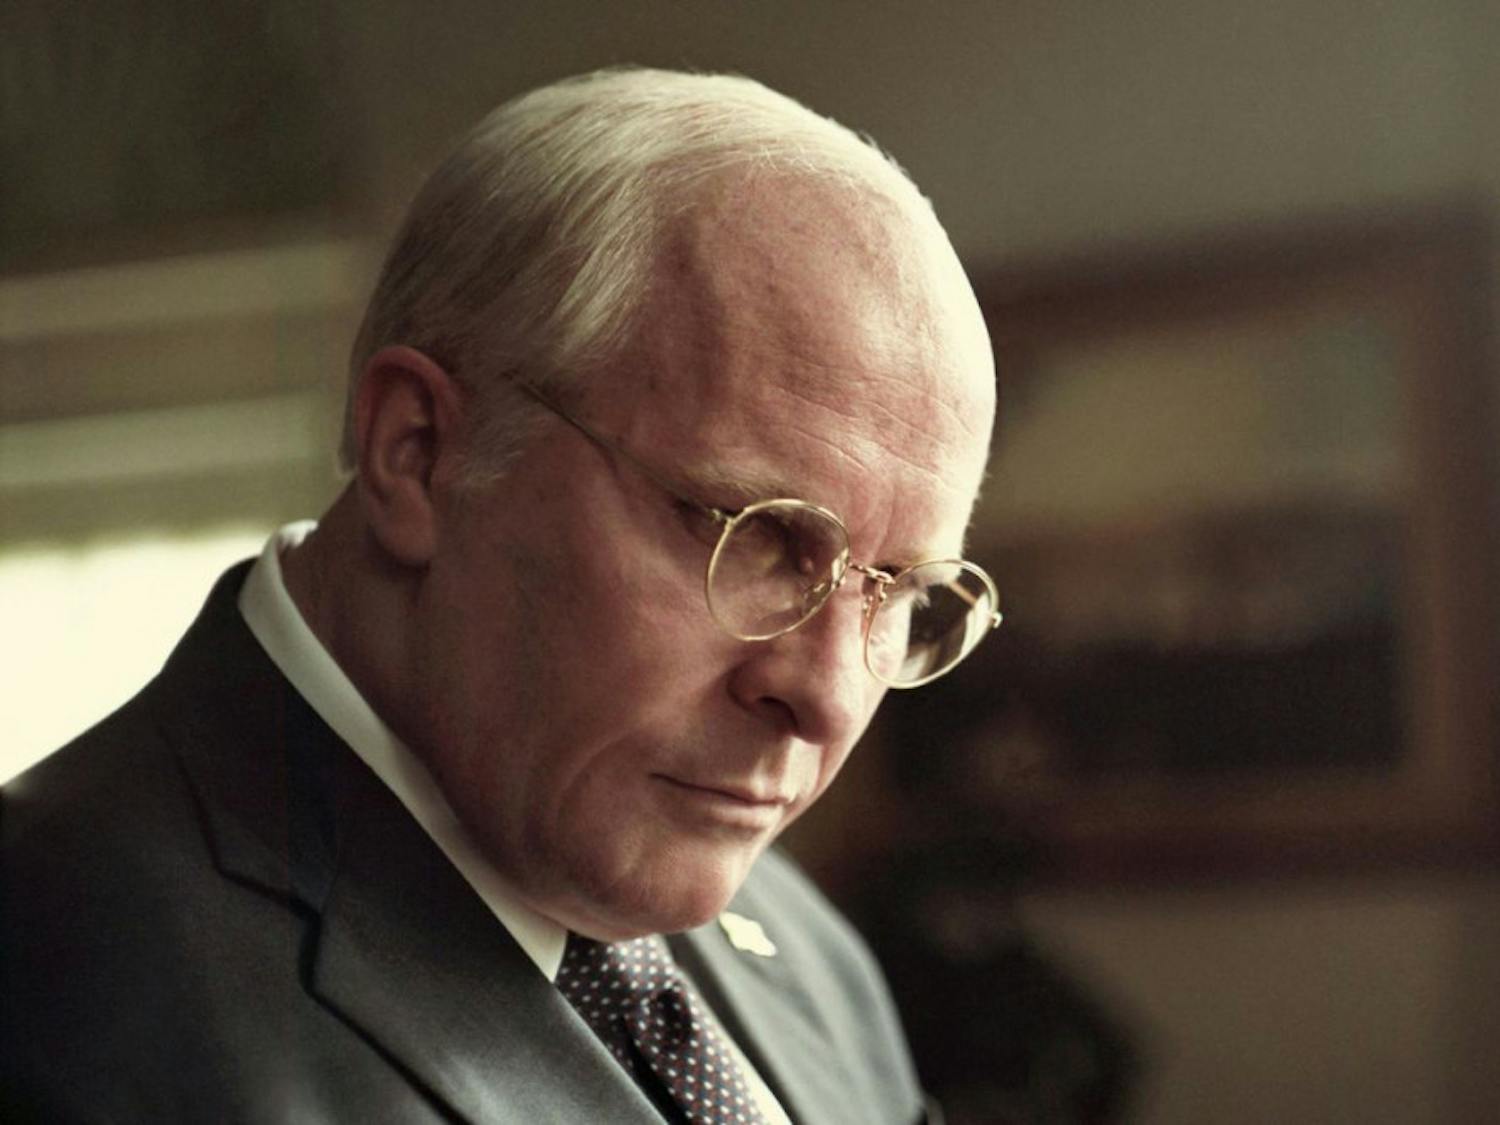 Christian Bale’s performance manages to make one of the most notorious figures in modern politics a sympathetic human being.